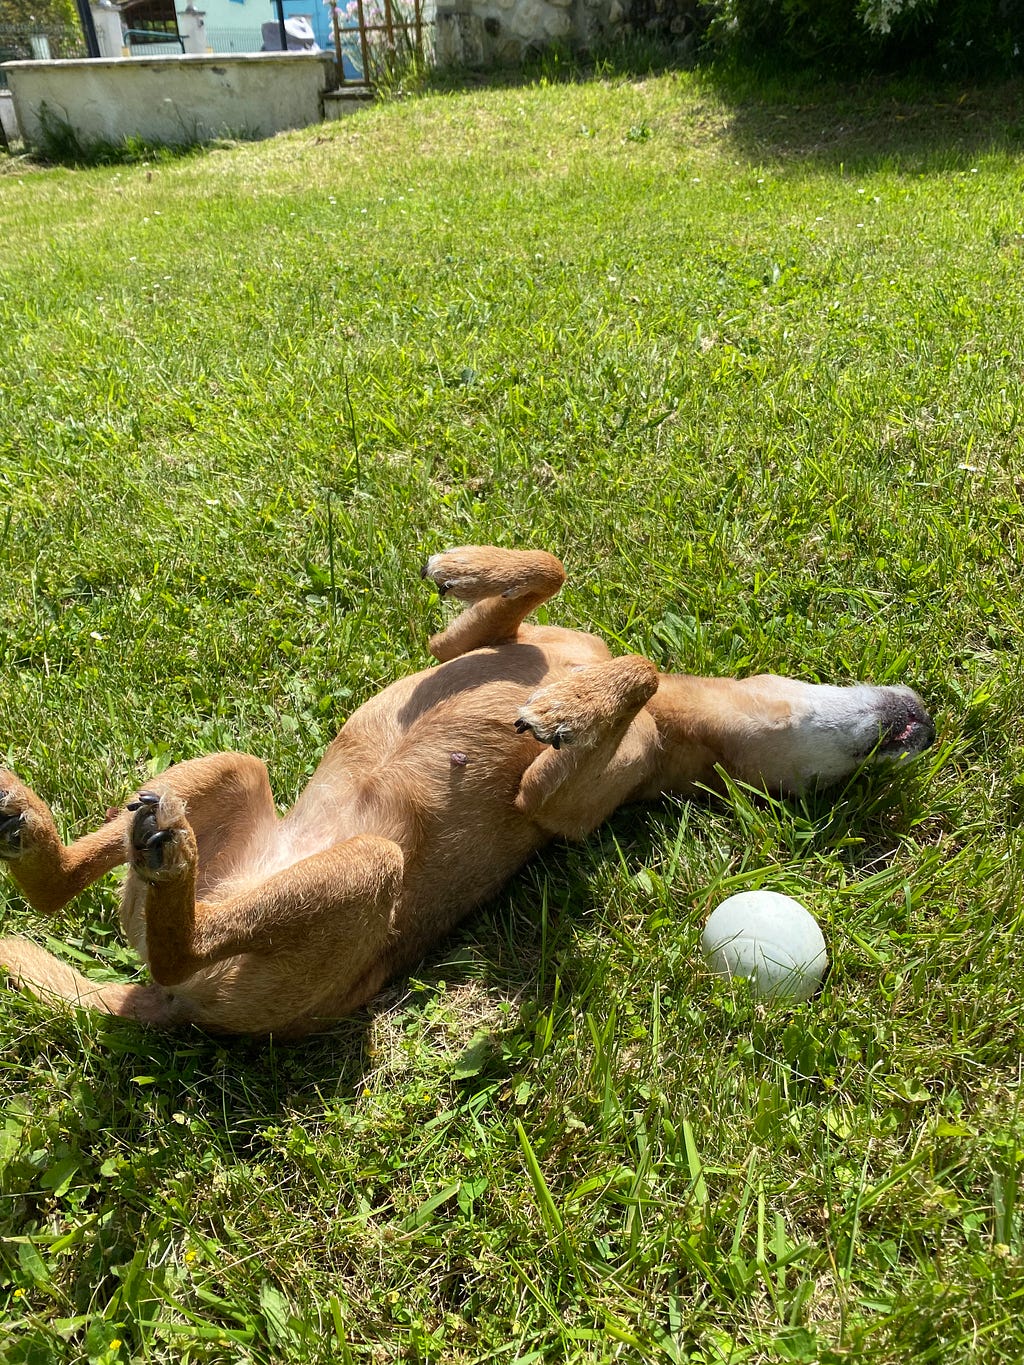 Millie is a lakeland patterdale mix terrier, orangey brown, with a white, older dog face, lying flat on her back on a lawn, with her favorite squeaky ball next to her, enjoying the sun.